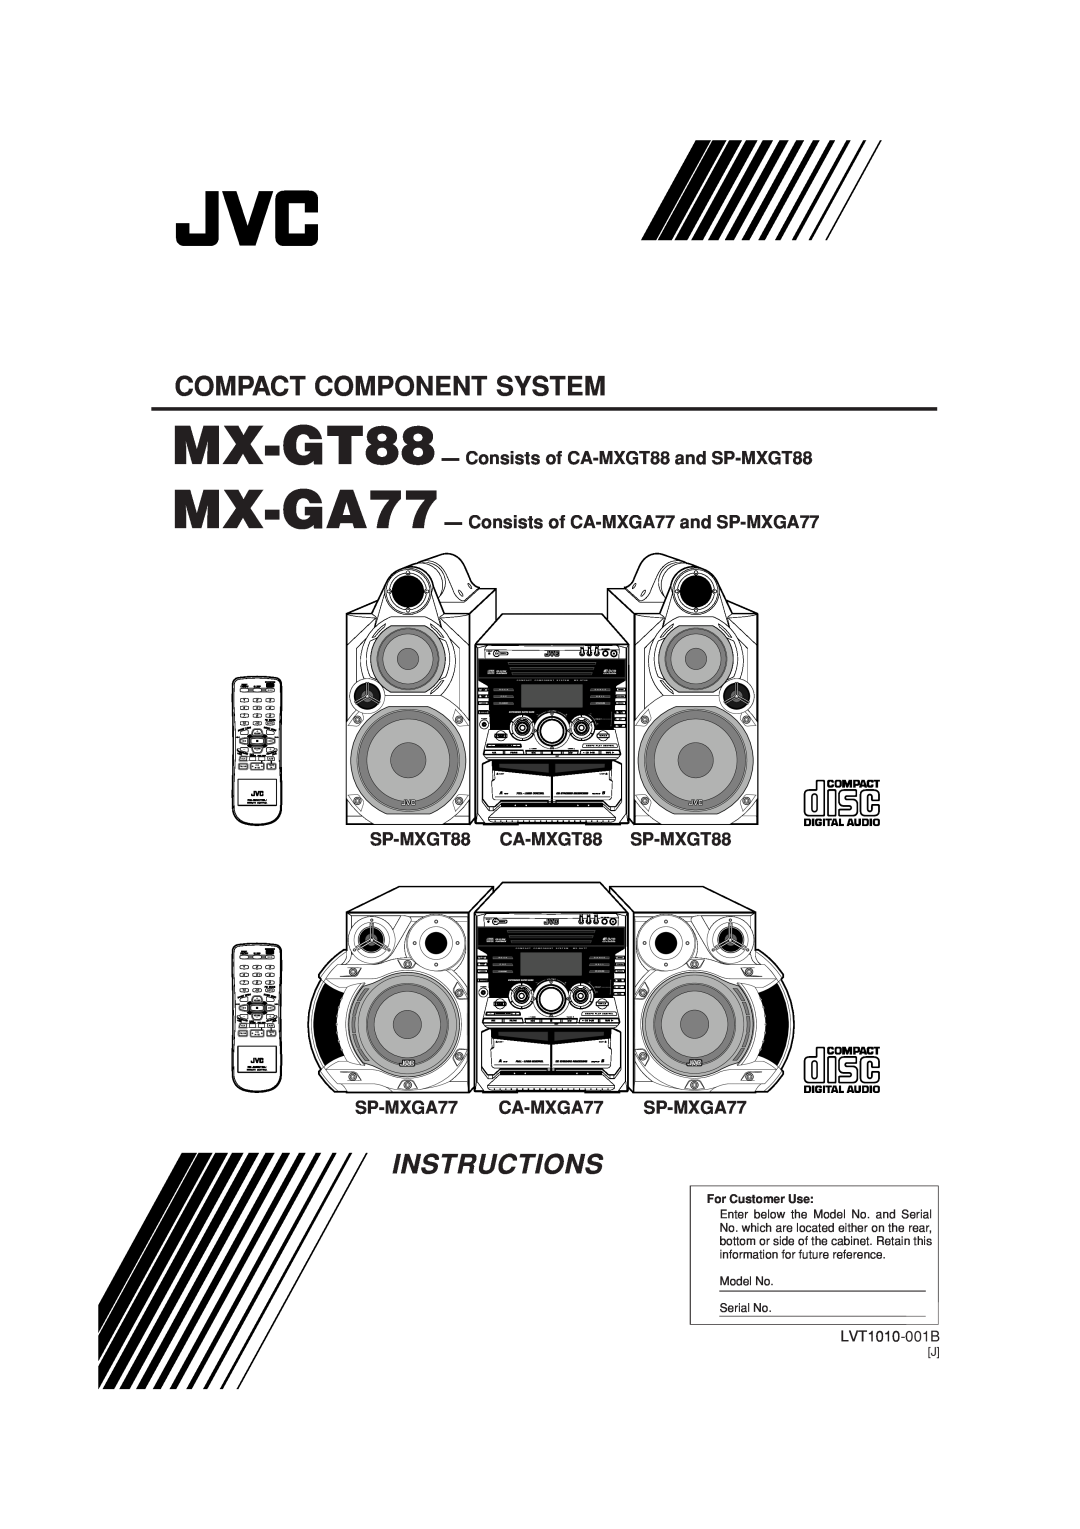 JVC MX-GT88 manual Compact Component System, Instructions, SP-MXGT88, CA-MXGT88, SP-MXGA77 CA-MXGA77 SP-MXGA77, Vo Lume 